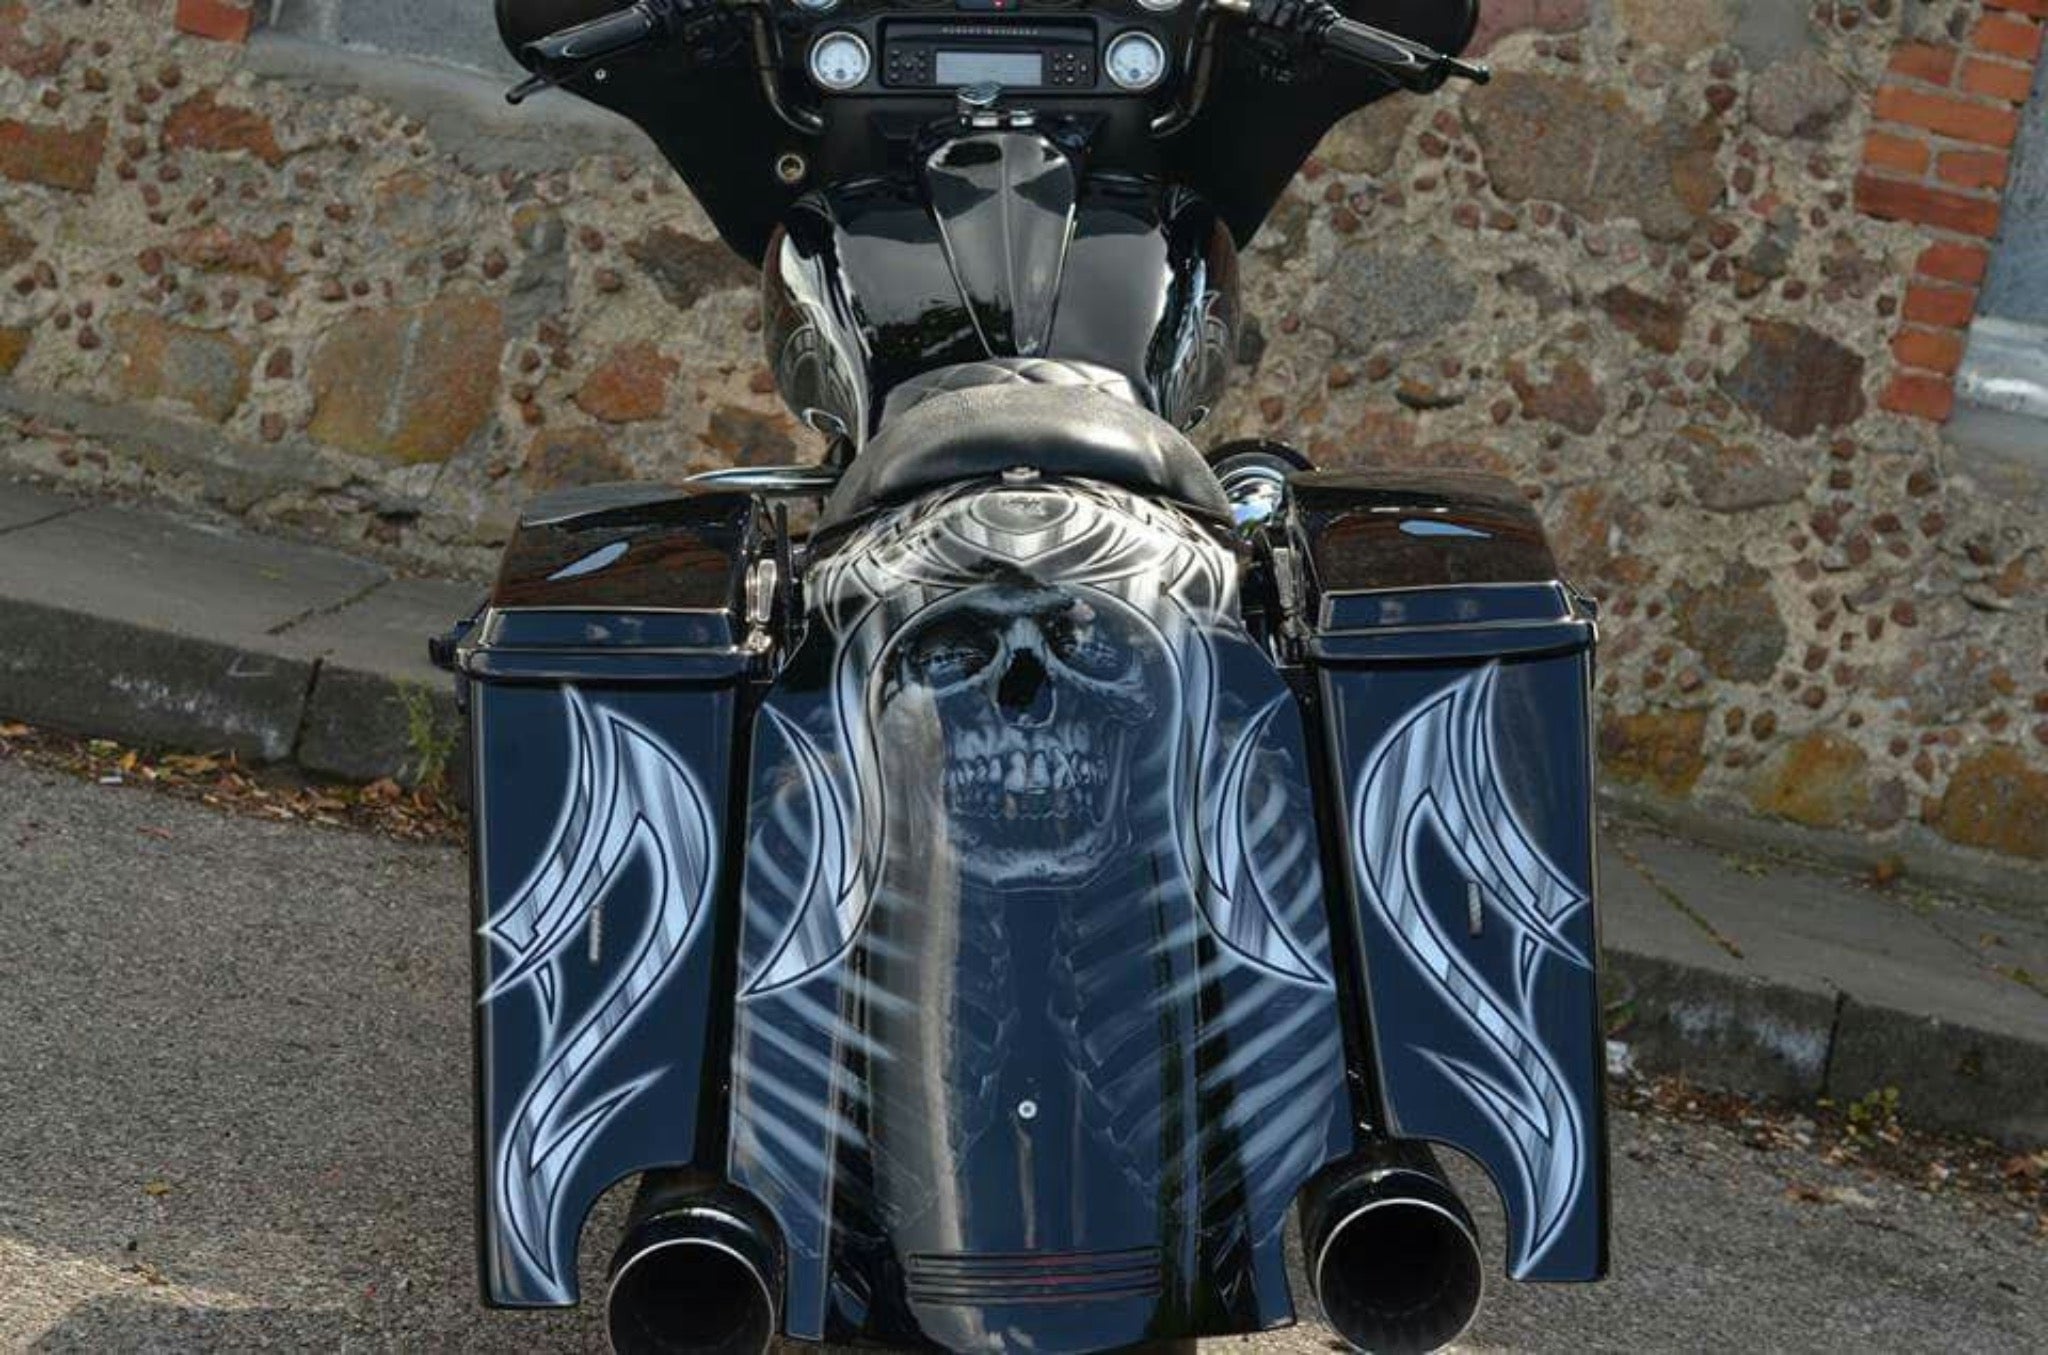 Rocca 5" Stretched Lay over fender cover for Harley Davidson Touring 2009-2013 models - Tommy&Sons